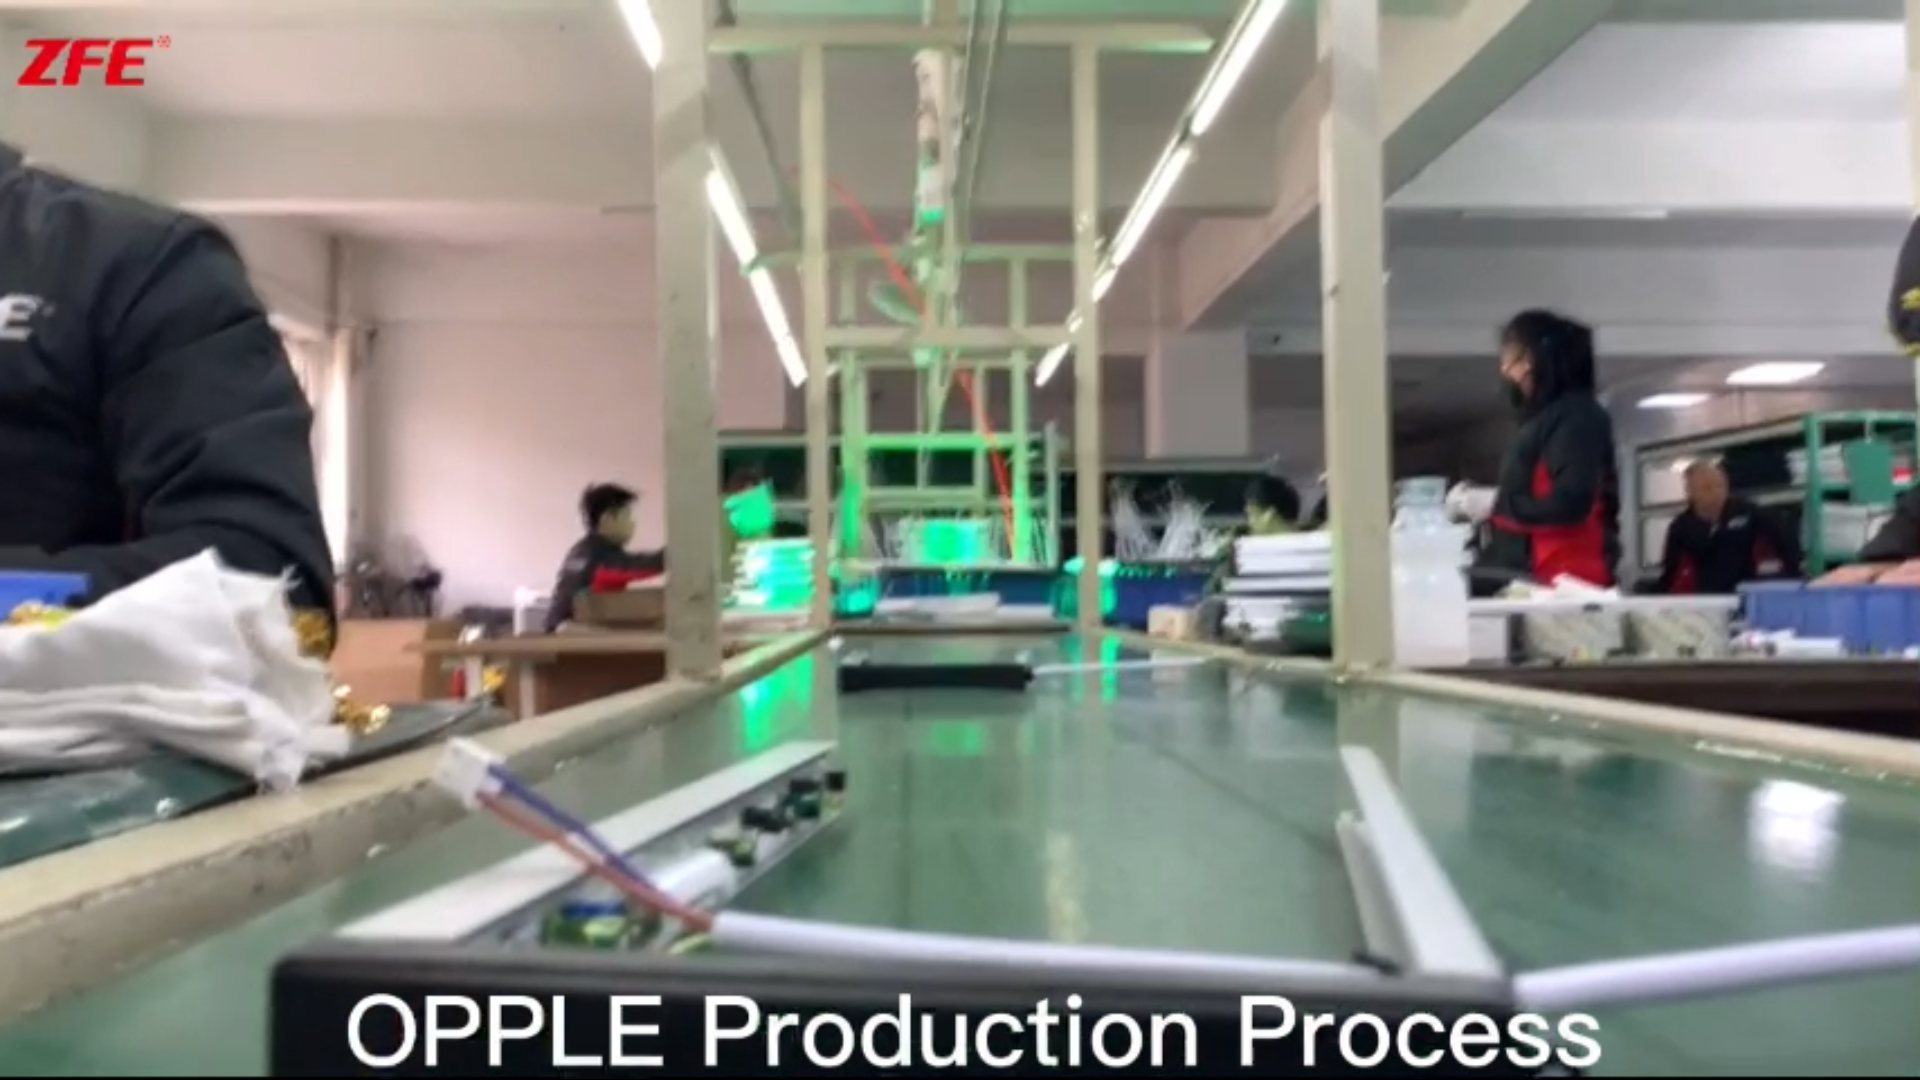 OEM Production Line For OPPLE Branded Product manufactured by Guangdong Zhenhui Fire Technology